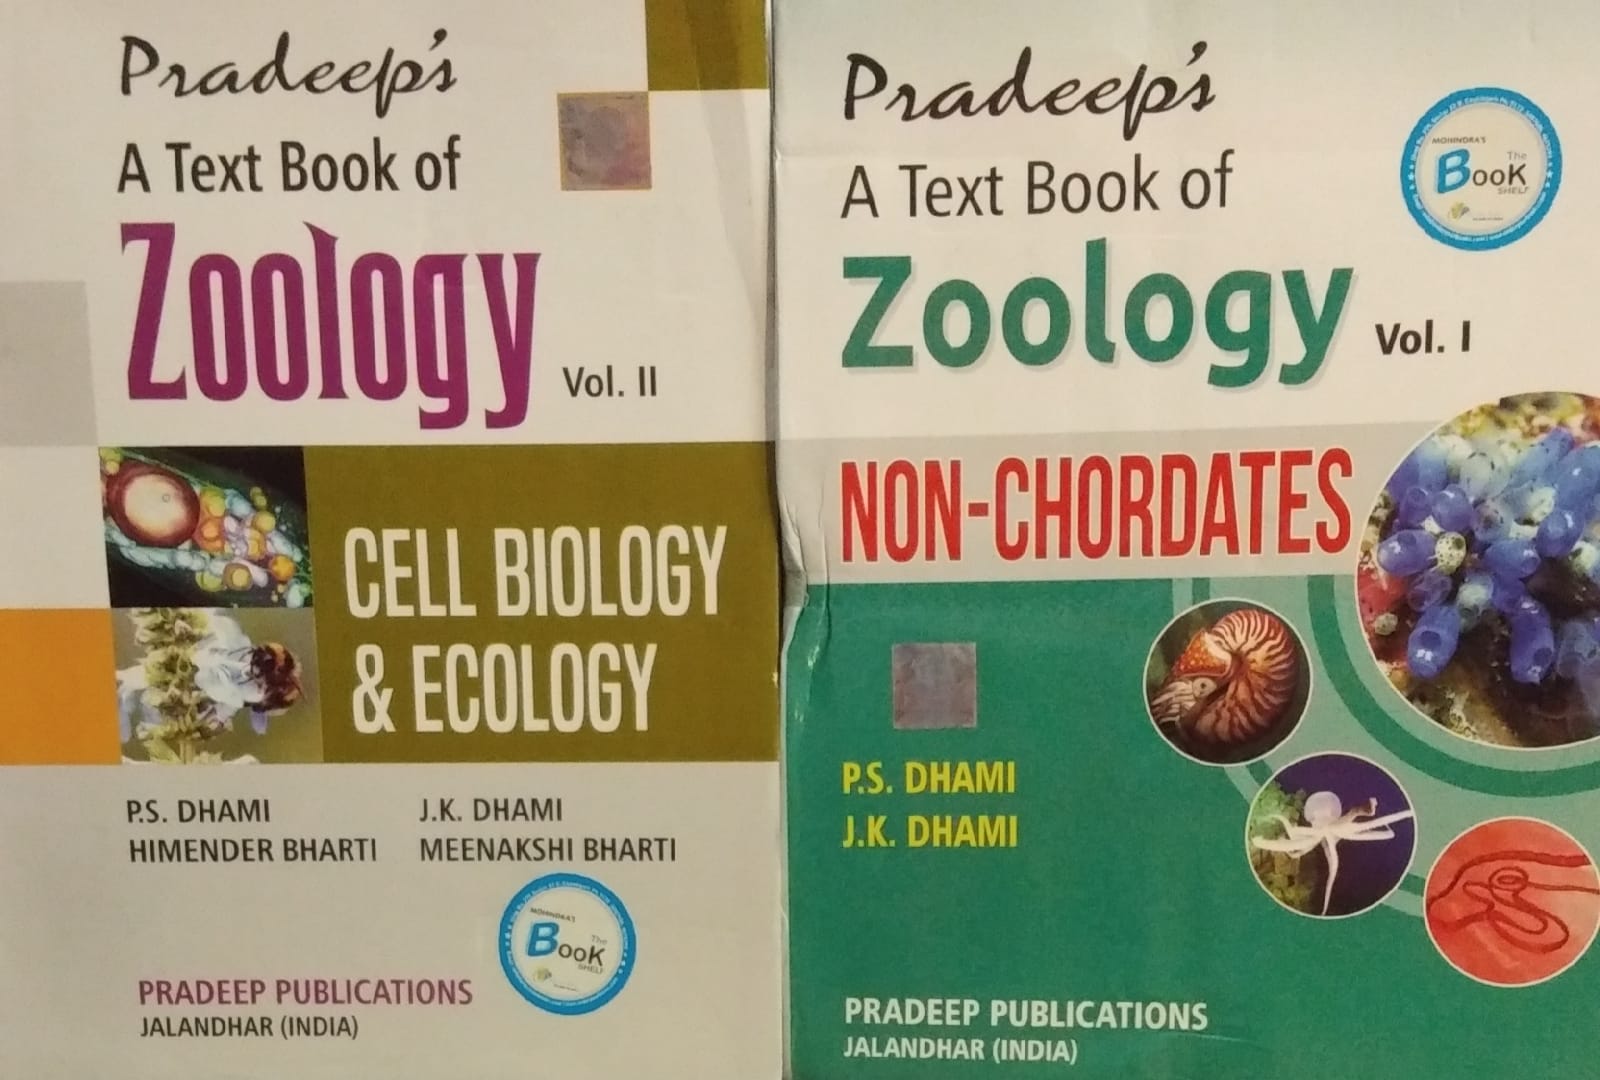 Pradeep A Text Book of Zoology Vol. 1 and Vol 2(set of 2 books), Nonchordates B.Sc., Sem. 1 & 2 (P.U.) by P.S. Dhami & J.K. Dhami, Edition 2022